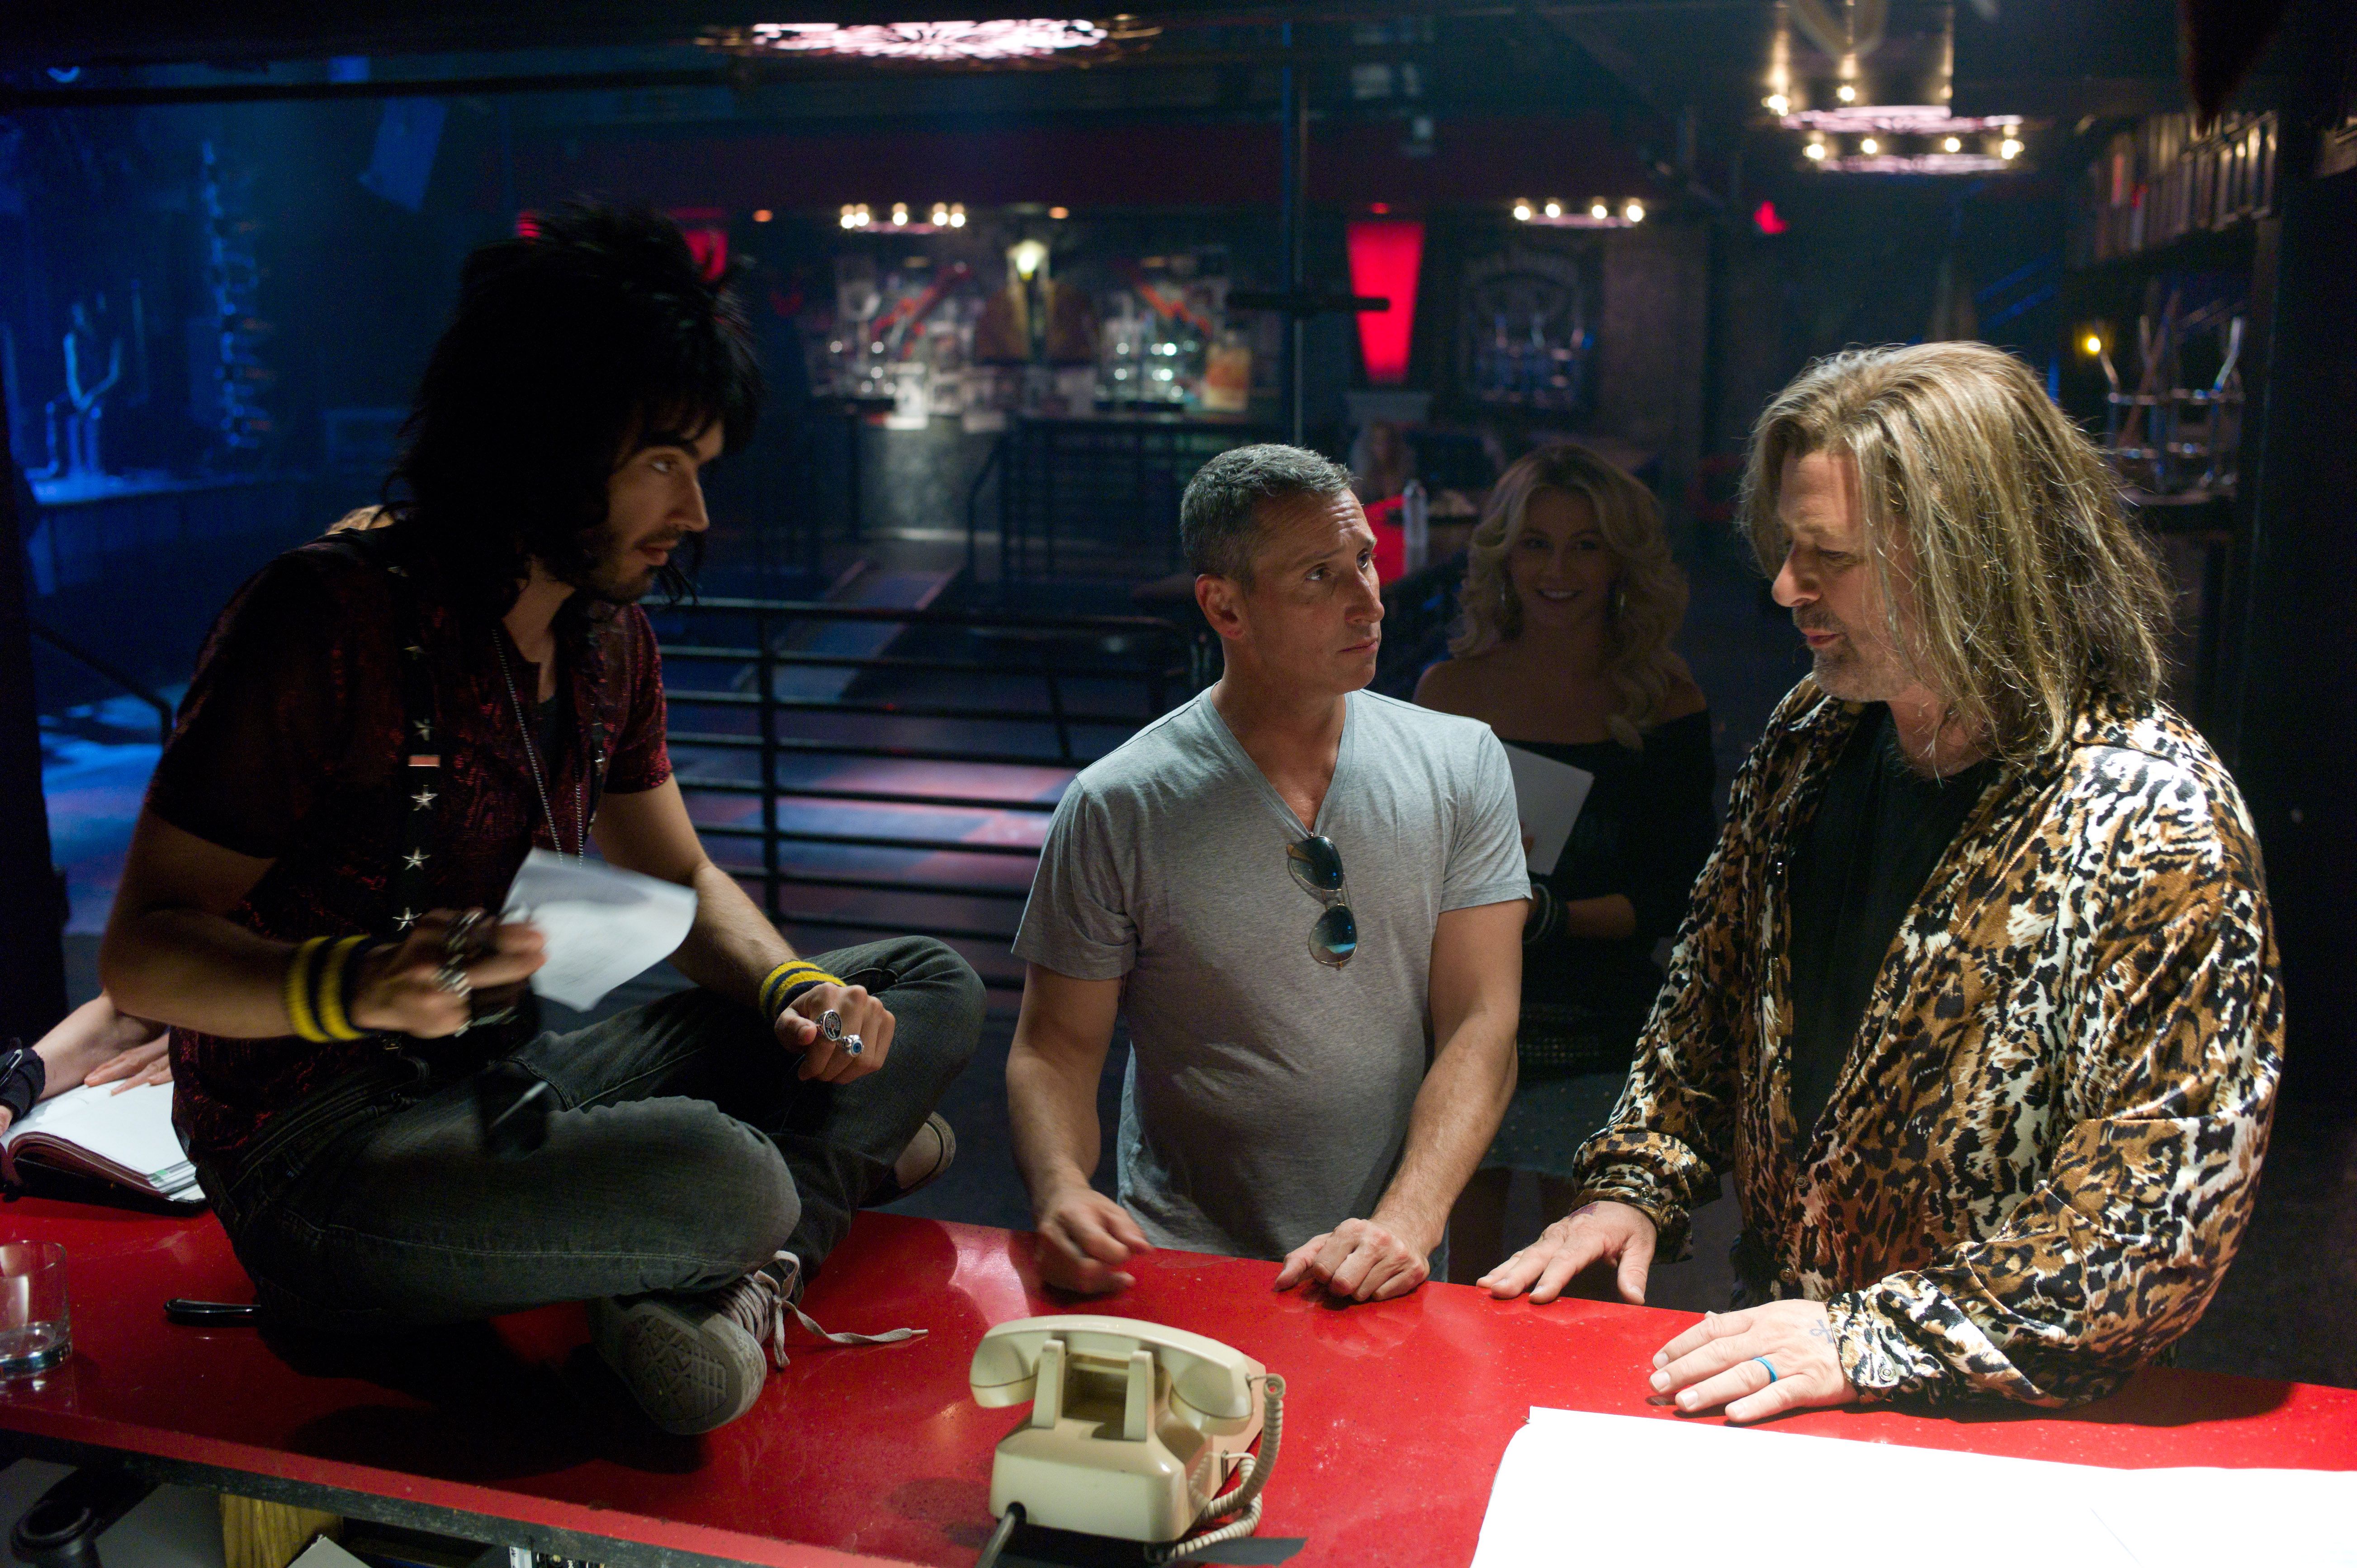 ROCK OF AGES Movie Images Featuring Tom Cruise | Collider